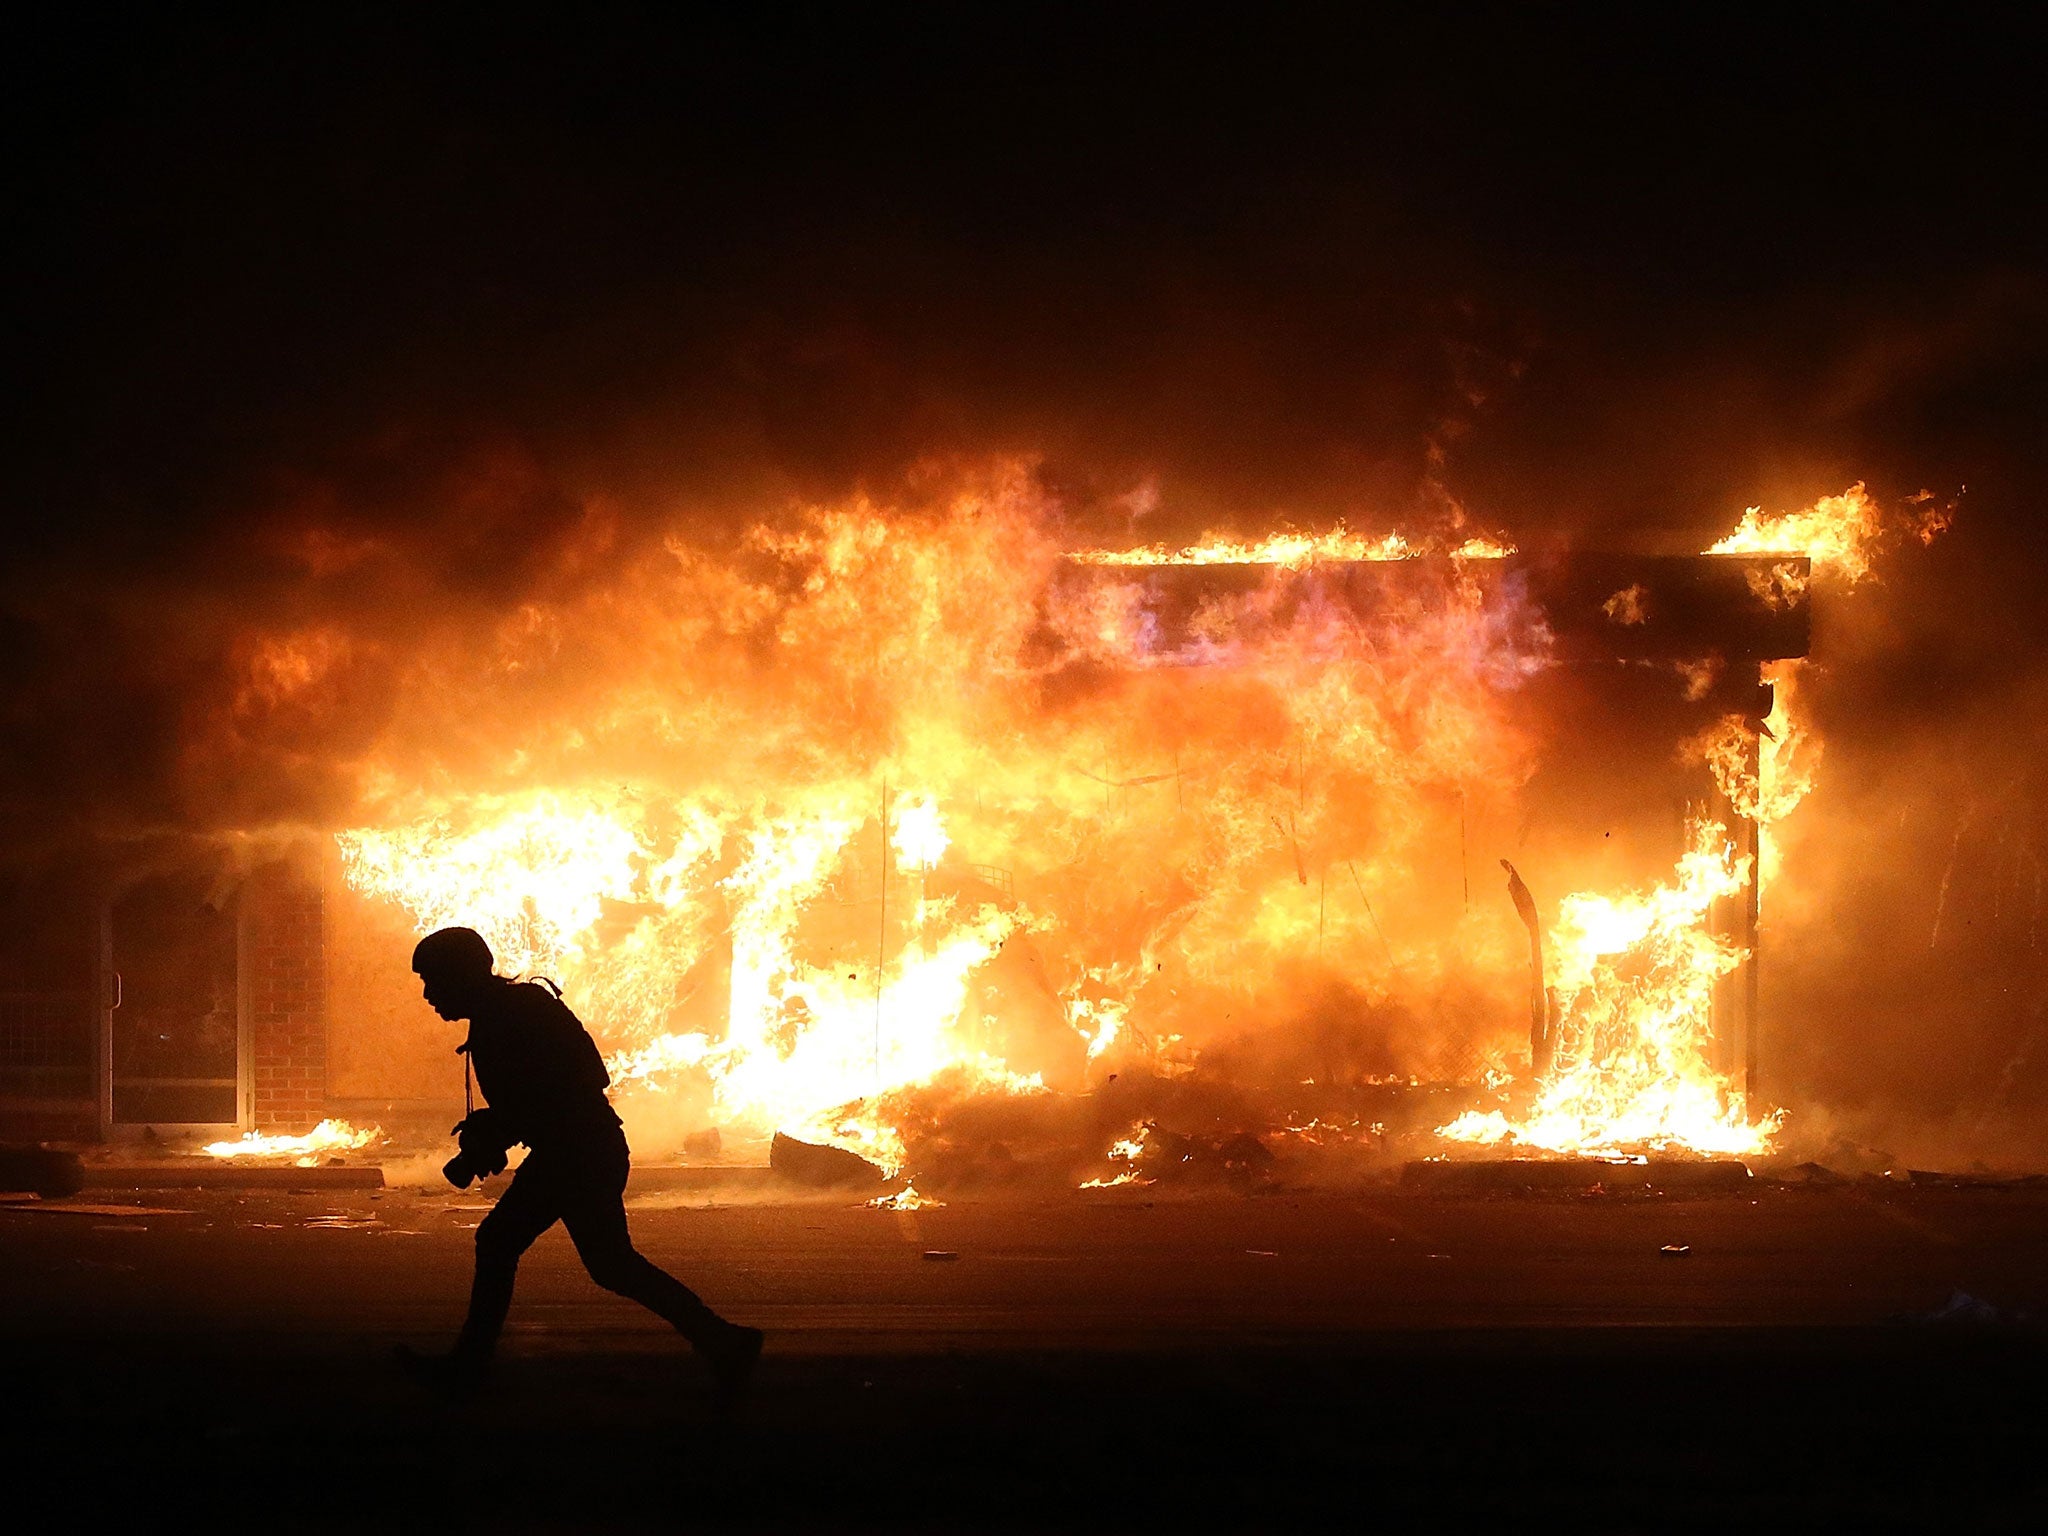 A photographer runs by a burning building during a demonstration on November 25, 2014 in Ferguson, Missouri.